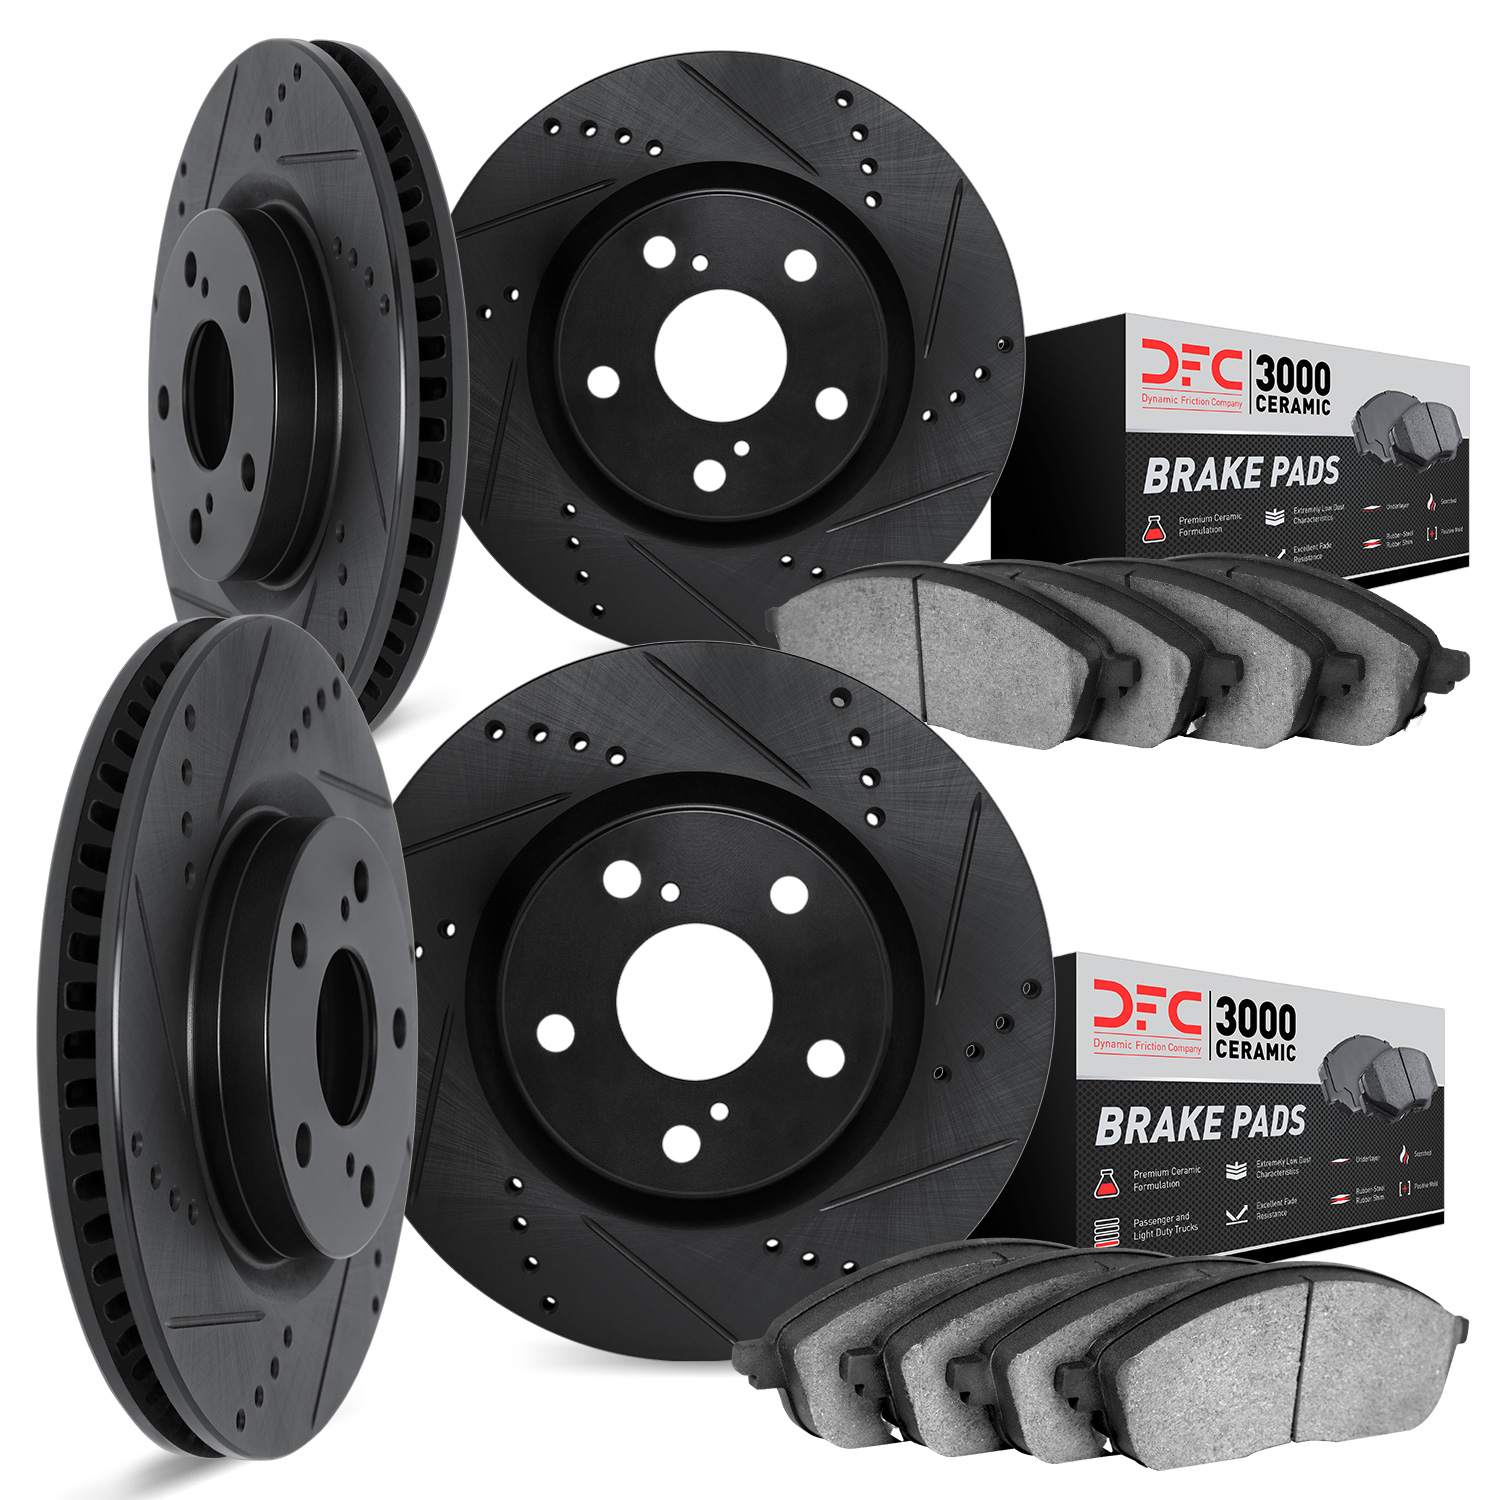 8304-13007 Drilled/Slotted Brake Rotors with 3000-Series Ceramic Brake Pads Kit [Black], 1990-1994 Subaru, Position: Front and R